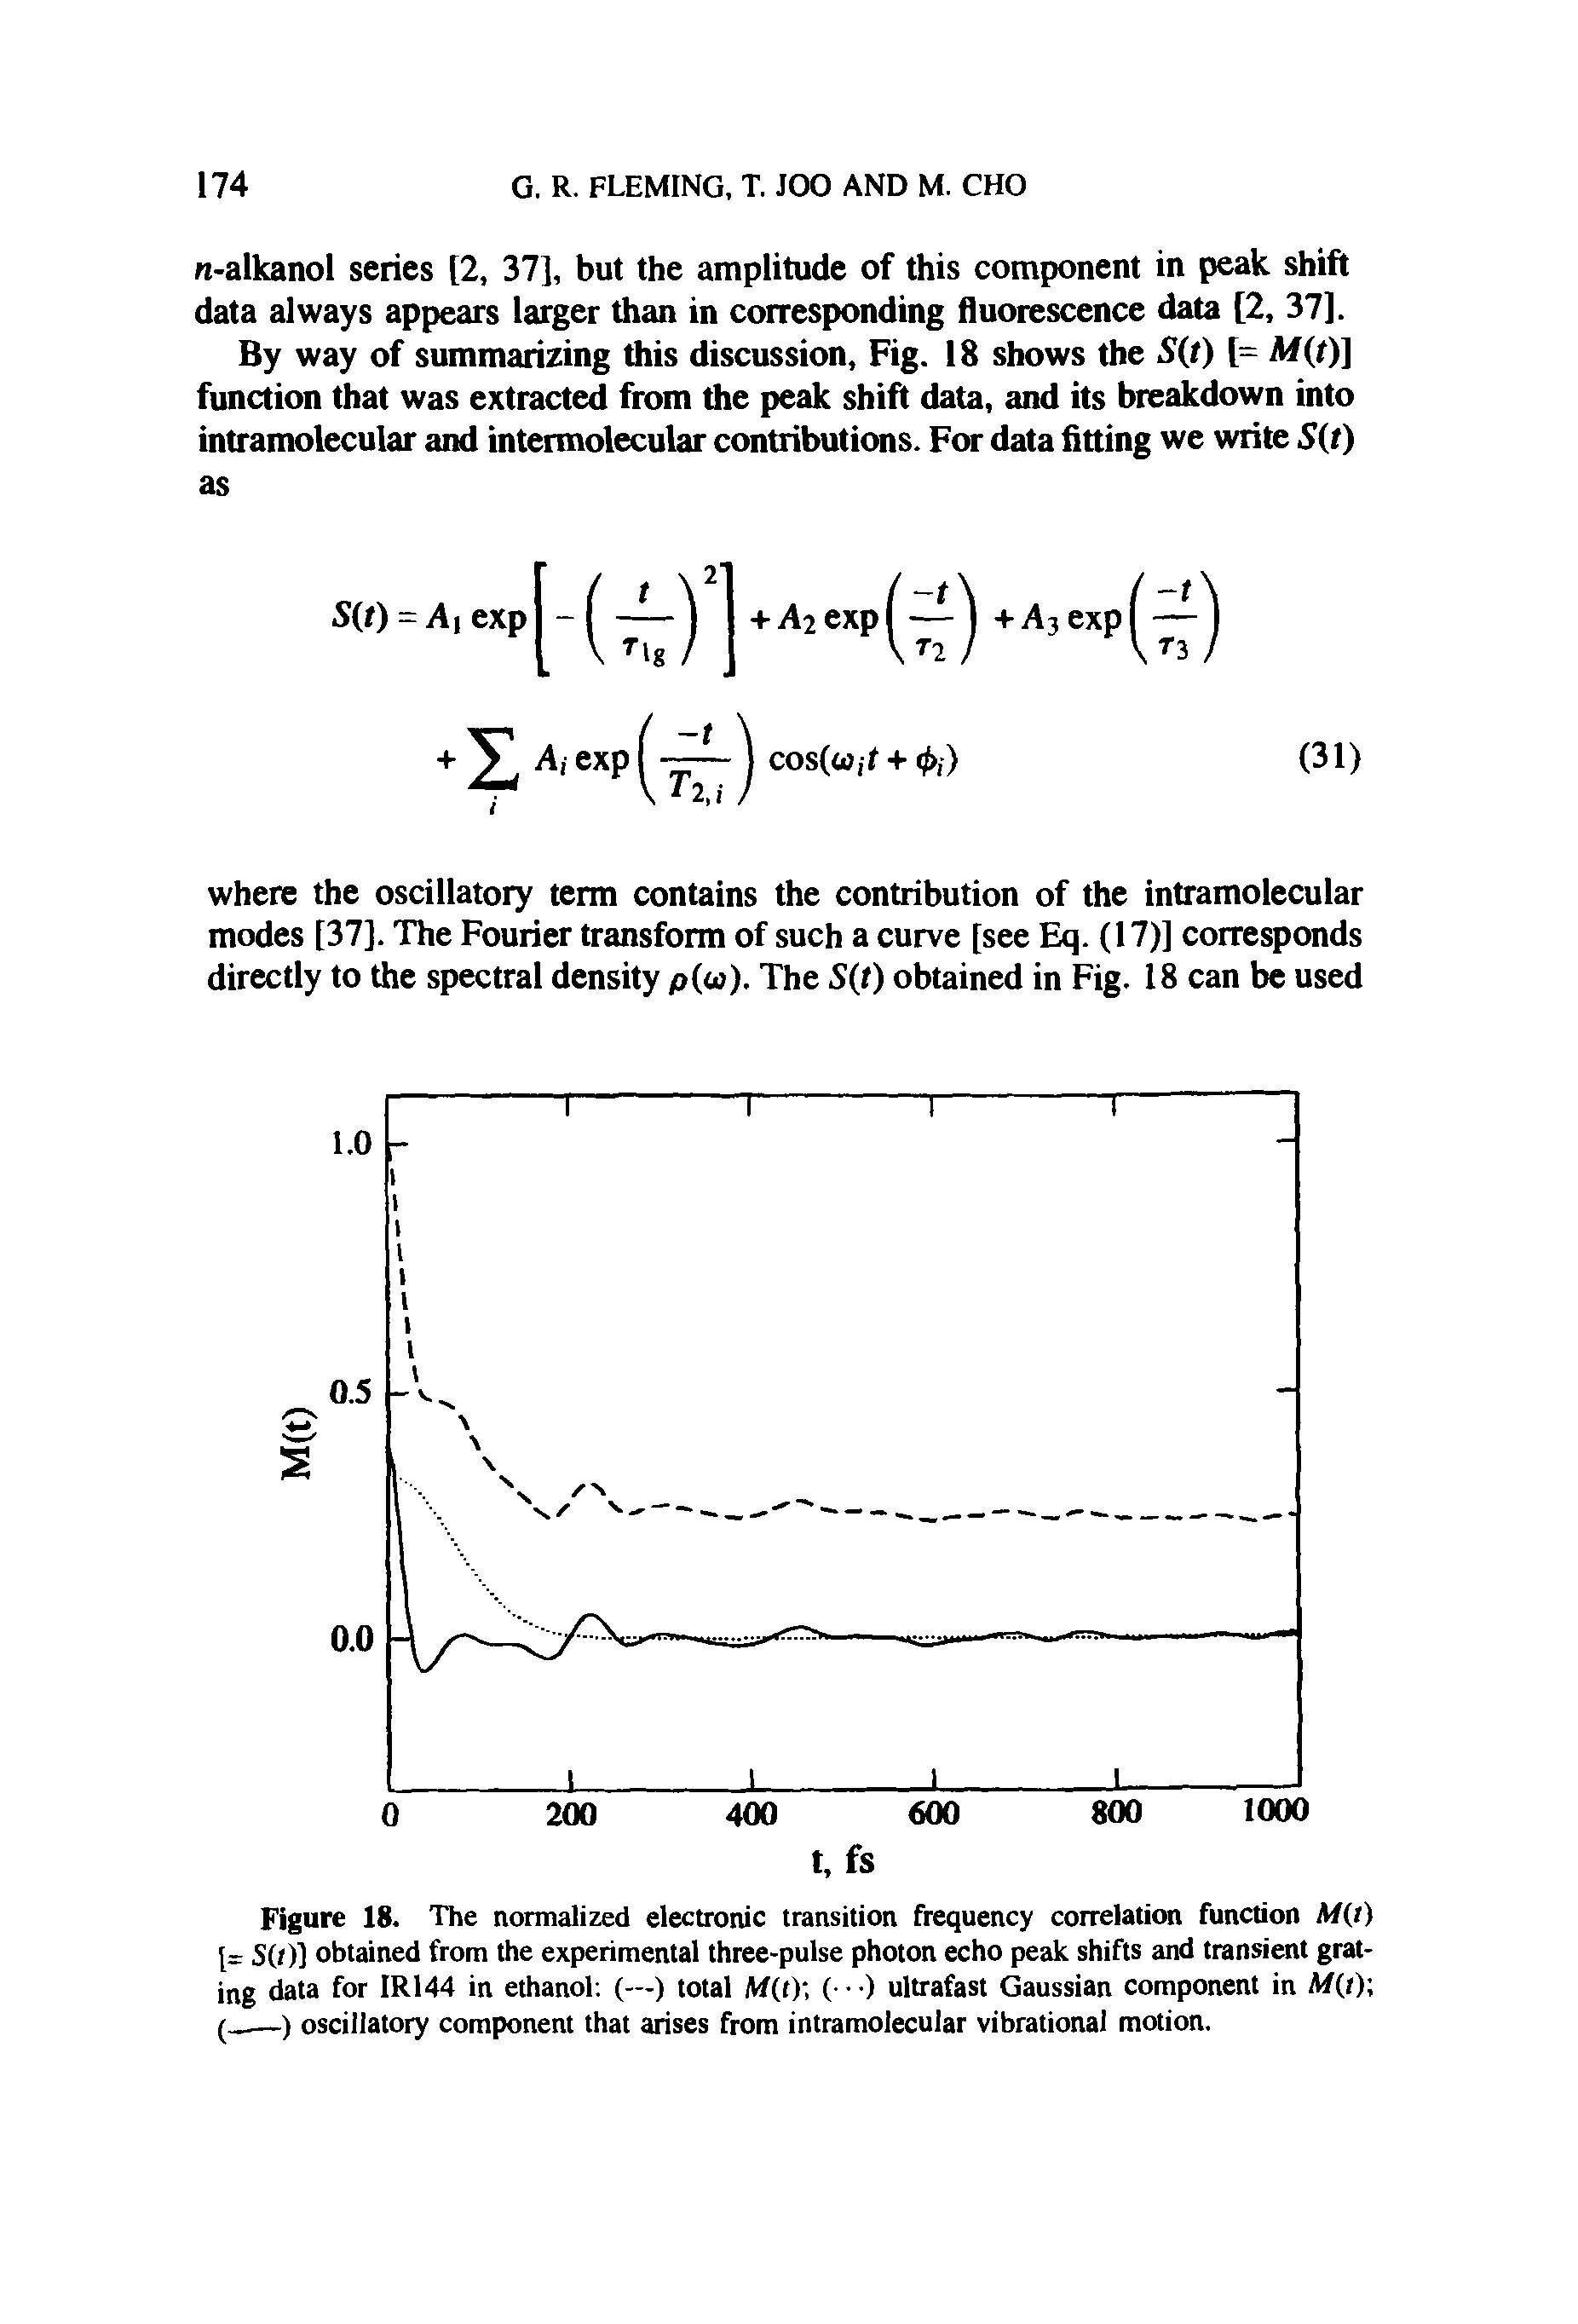 Figure 18. The normalized electronic transition frequency correlation function M(t) 1= S(i)] obtained from the experimental three-pulse photon echo peak shifts and transient grating data for IR144 in ethanol (—) total W(t) ( ) ultrafast Gaussian component in M(t) ( ) oscillatory component that arises from intramolecular vibrational motion.